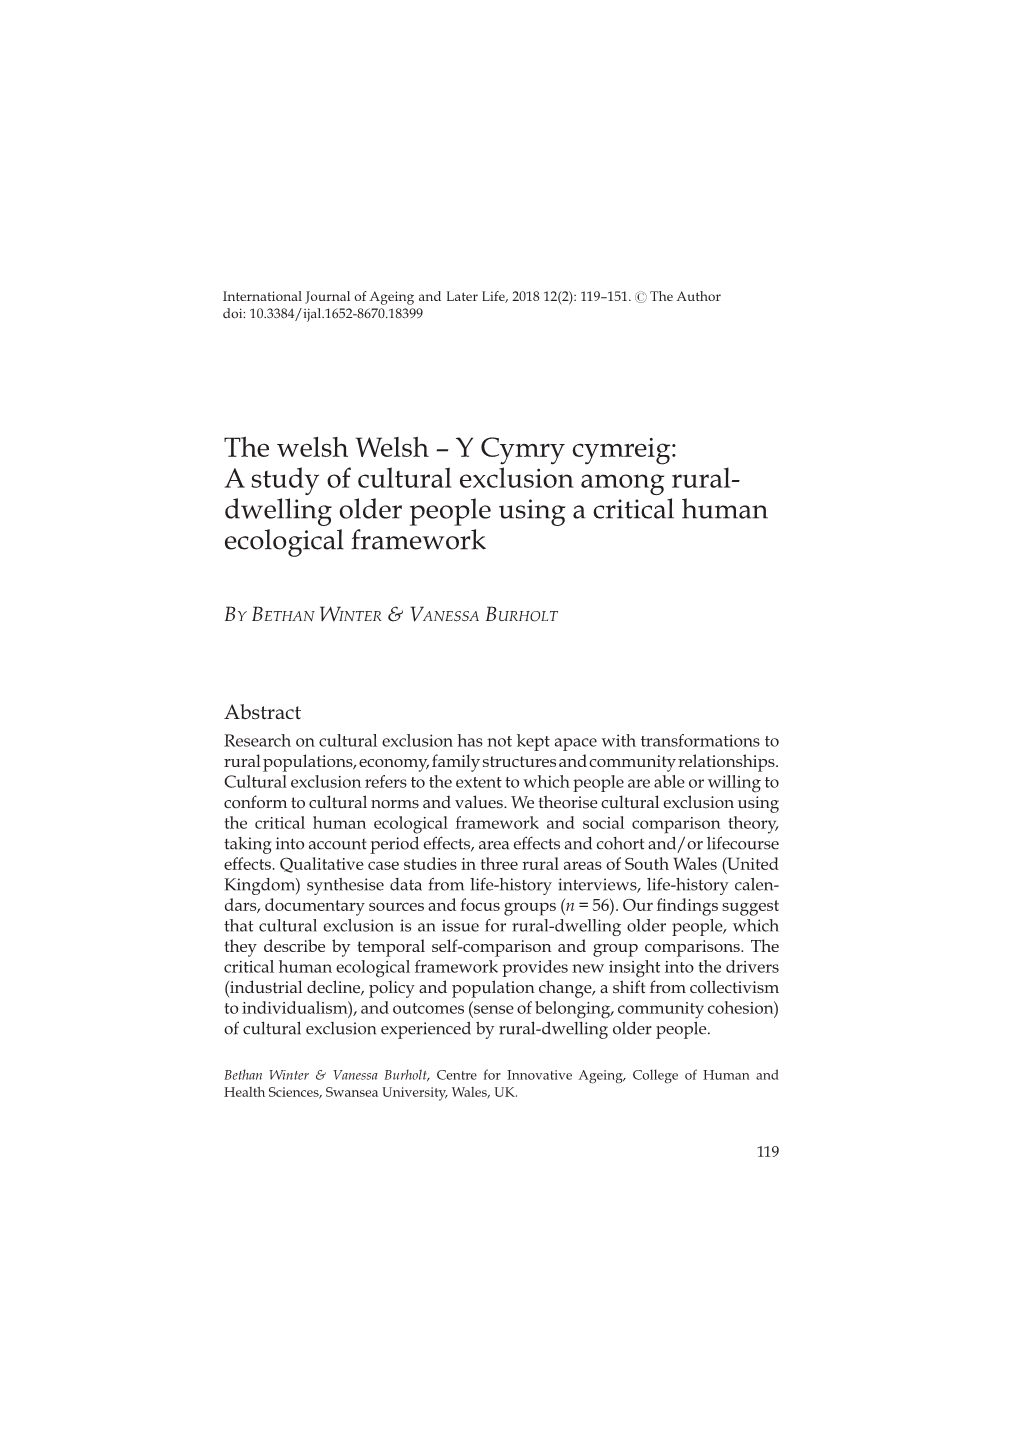 The Welsh Welsh – Y Cymry Cymreig: a Study of Cultural Exclusion Among Rural- Dwelling Older People Using a Critical Human Ecological ­Framework